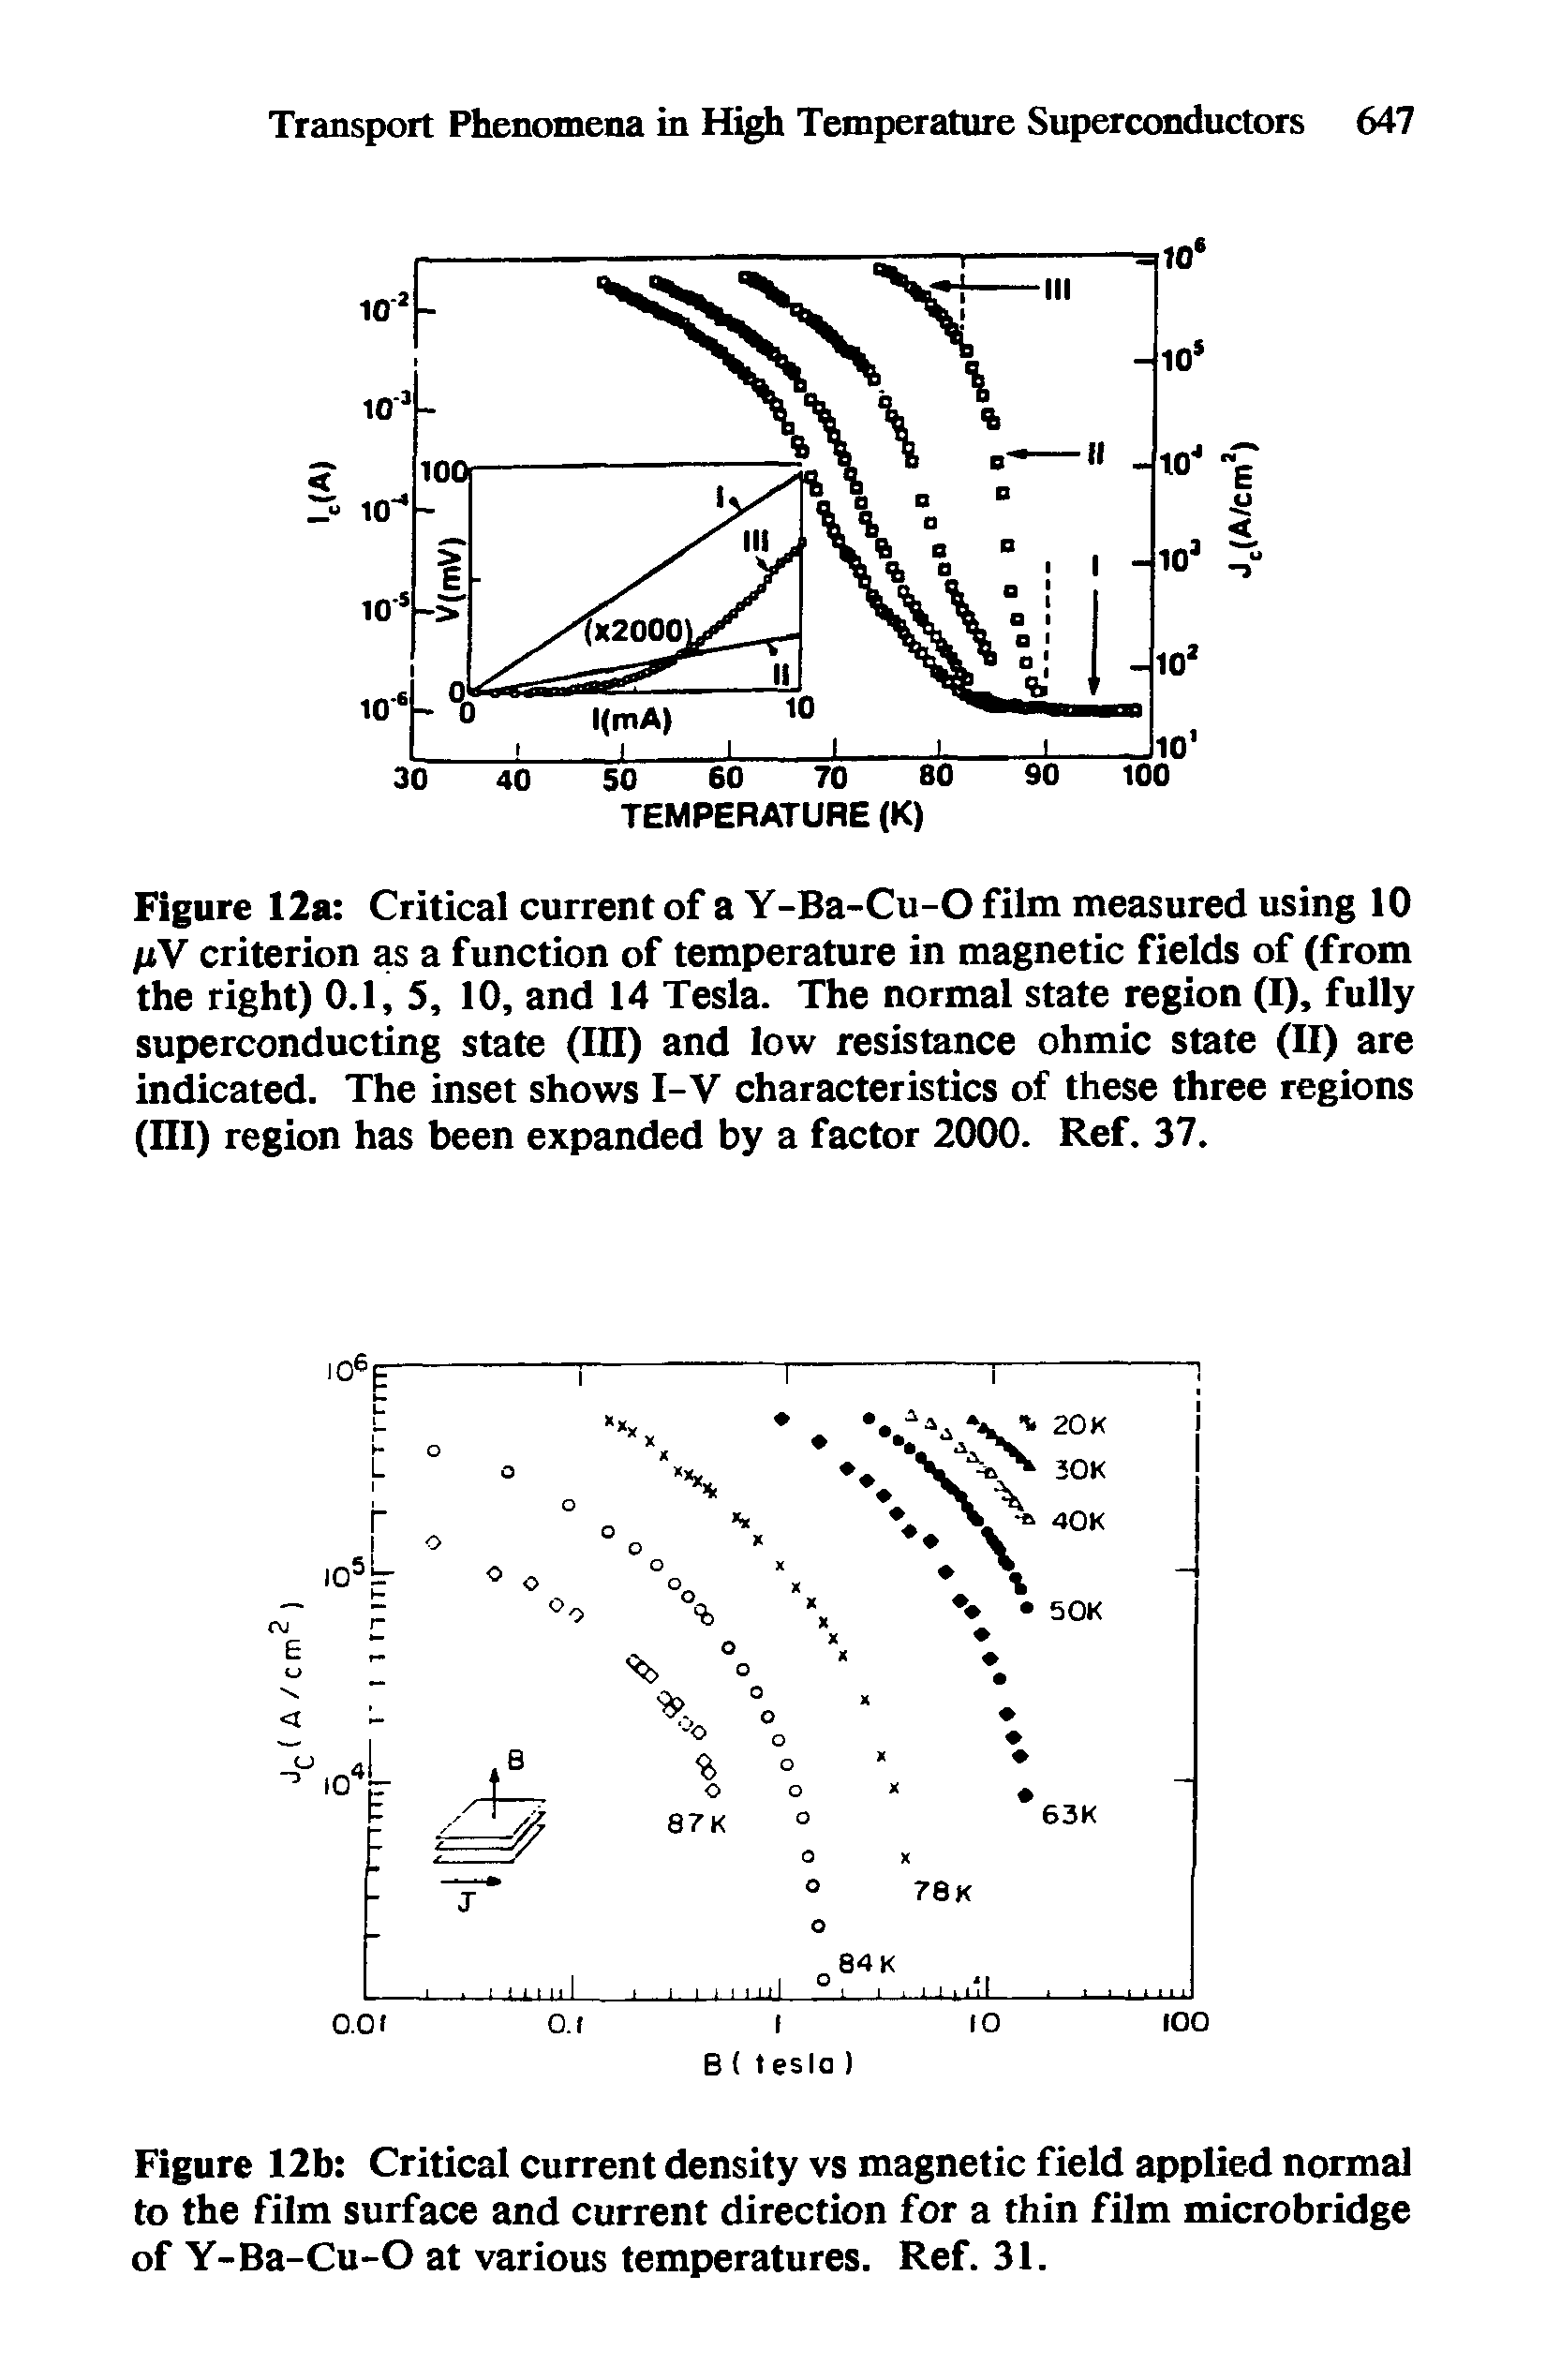 Figure 12b Critical current density vs magnetic field applied normal to the film surface and current direction for a thin film microbridge of Y-Ba-Cu-O at various temperatures. Ref. 31.